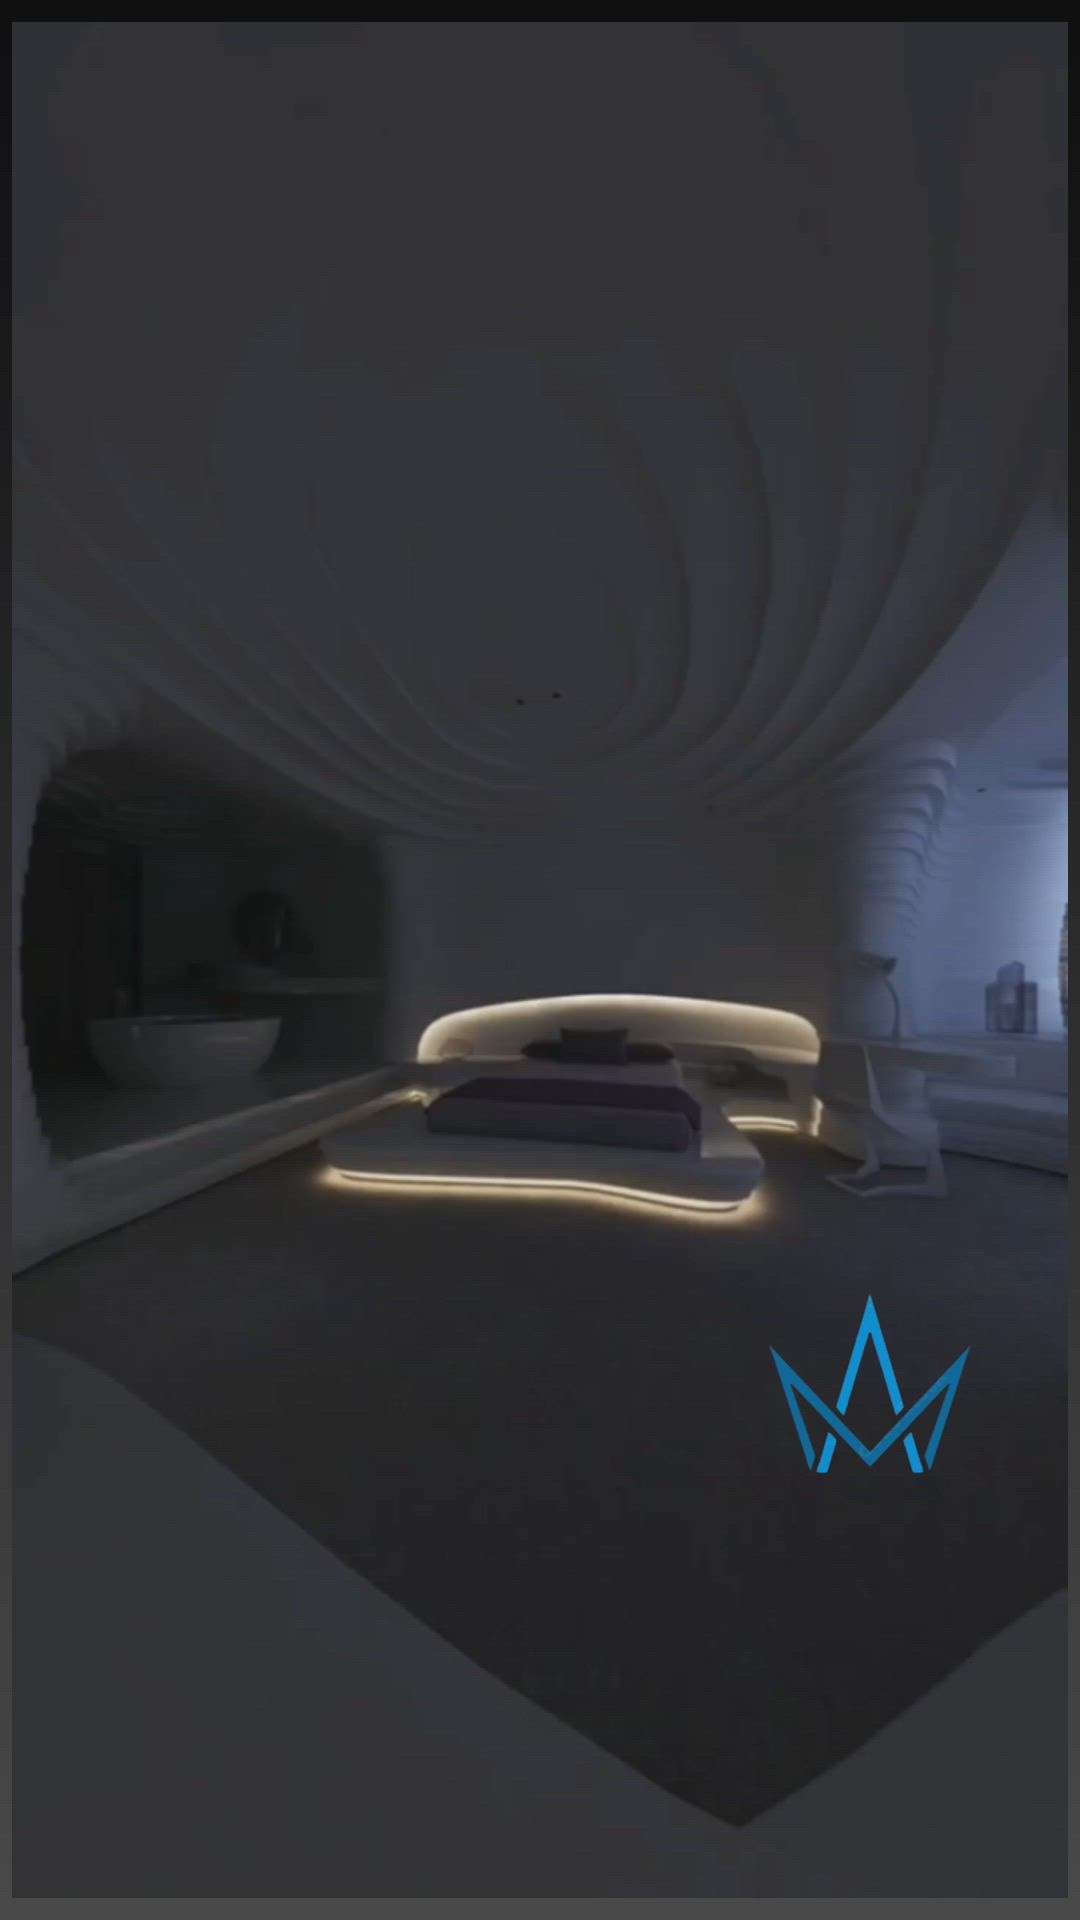 Change the complete aesthetics of your room get automated Lighting solutions from us. 

Did you get a chance to experience our products yet?

Contact us for more details.
.
. 
.
.
.
.
.
.
.
.
.
#smarthome #smartliving #smarthomedesign #smarthometechnology #smartswitches #innovation #modularswitches #homeautomationindia #homeautomation #homedecor #automatedscenes #architecture #architect #interiordesign #internetofthings #interiordesigner #smartindia #airsensor #motionsensor #royalautomation #smartlights #zwaveplus#zwave #trending #insta #instareels #reelsinstagram #luxuryhomes #cool #royalautomation